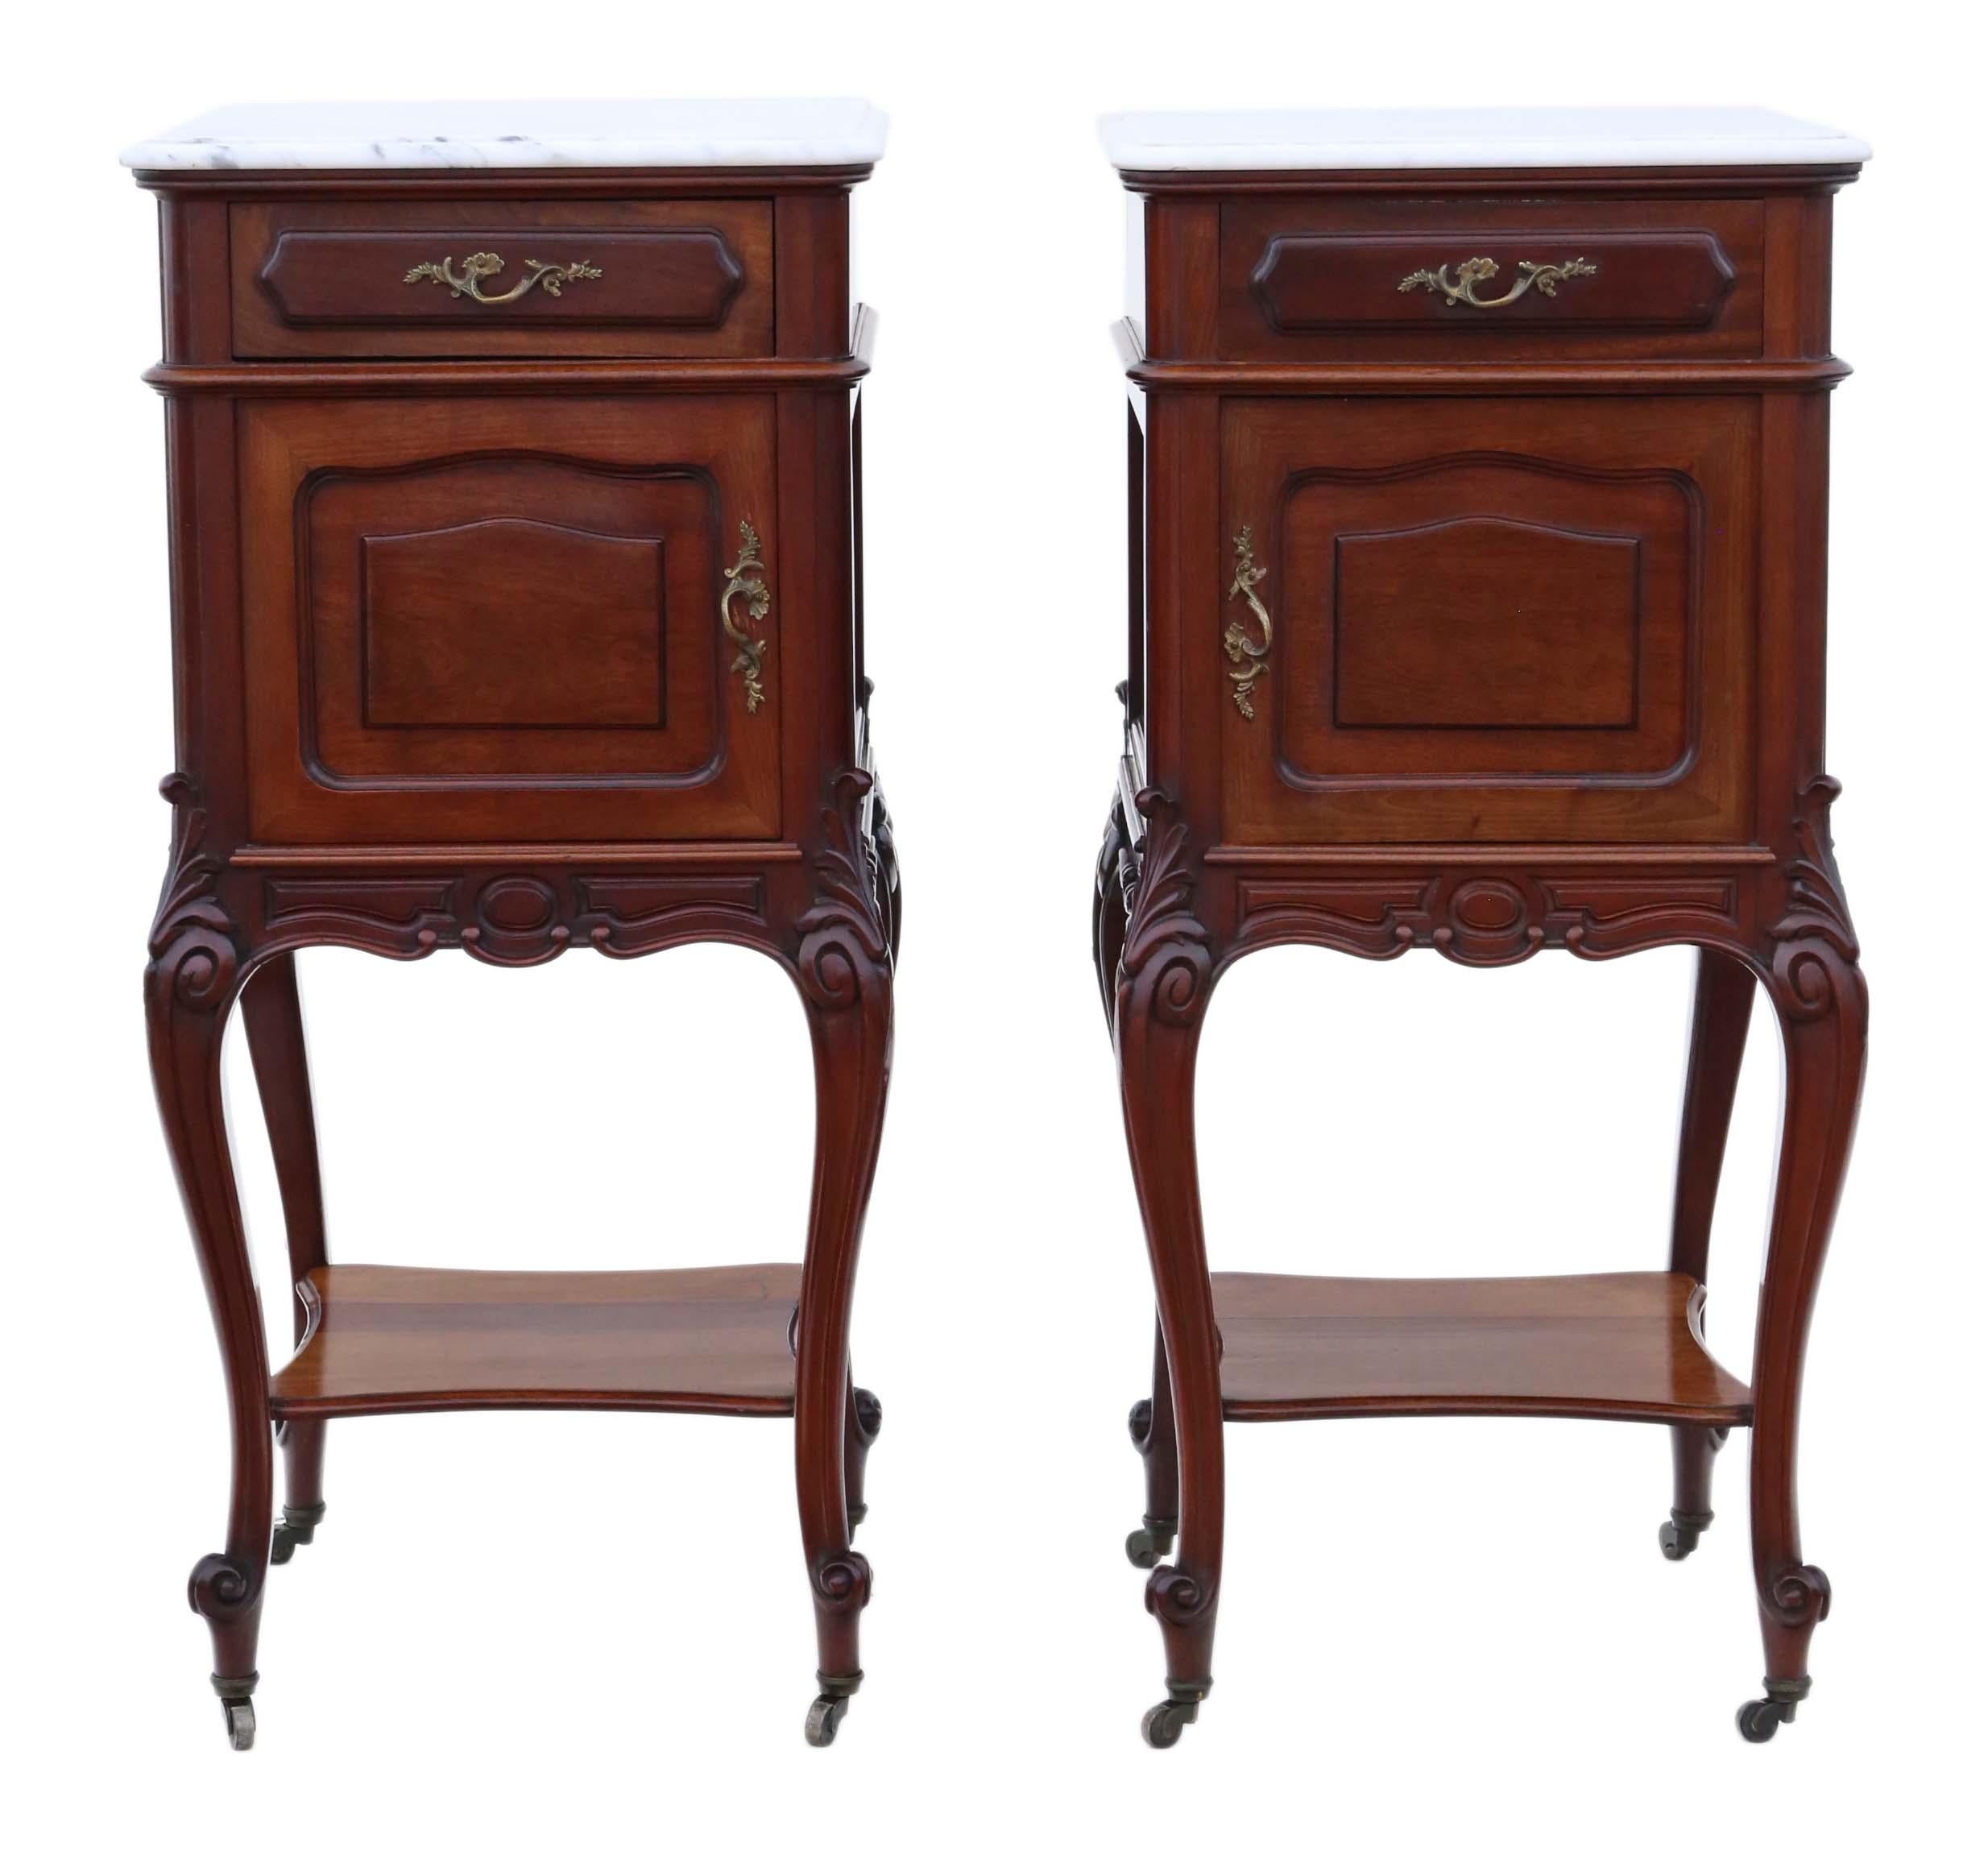 Antique fine quality pair of French bedside tables cupboards marble tops C1920.

Very heavy and solid, with no loose joints and no woodworm. The oak lined drawers slide freely and the cupboard catches work.

Would look great in the right